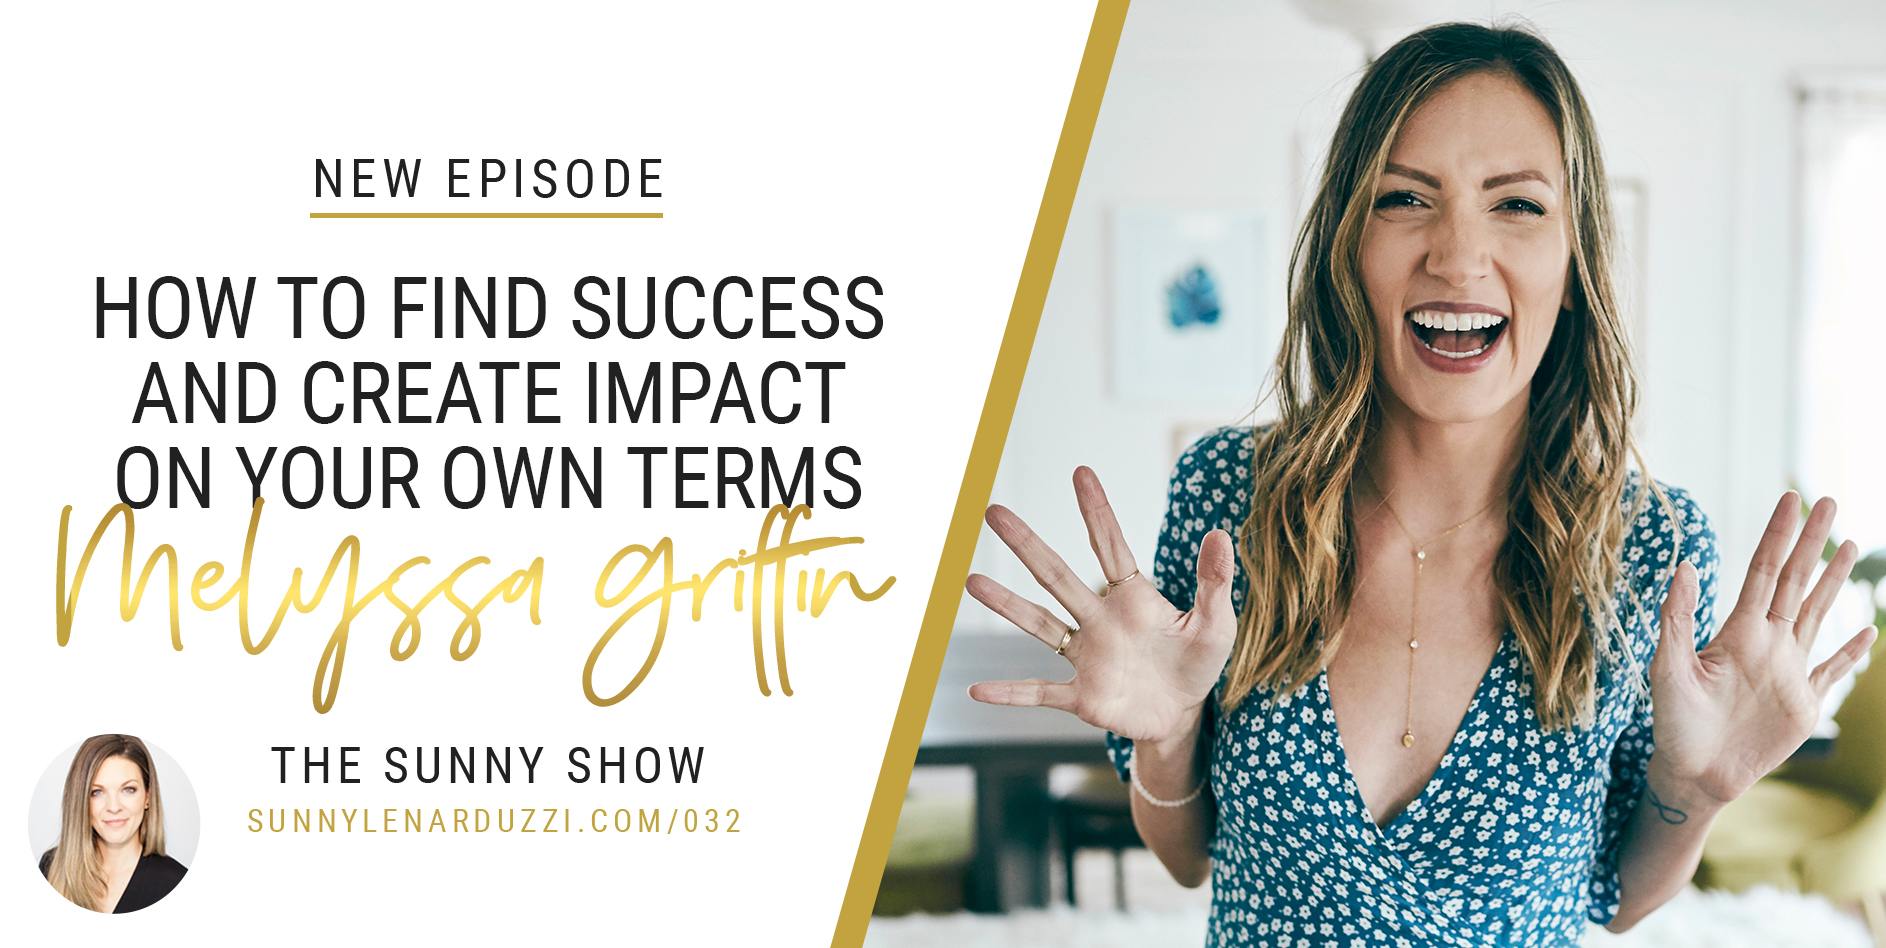 How to Find Success with Melyssa Griffin